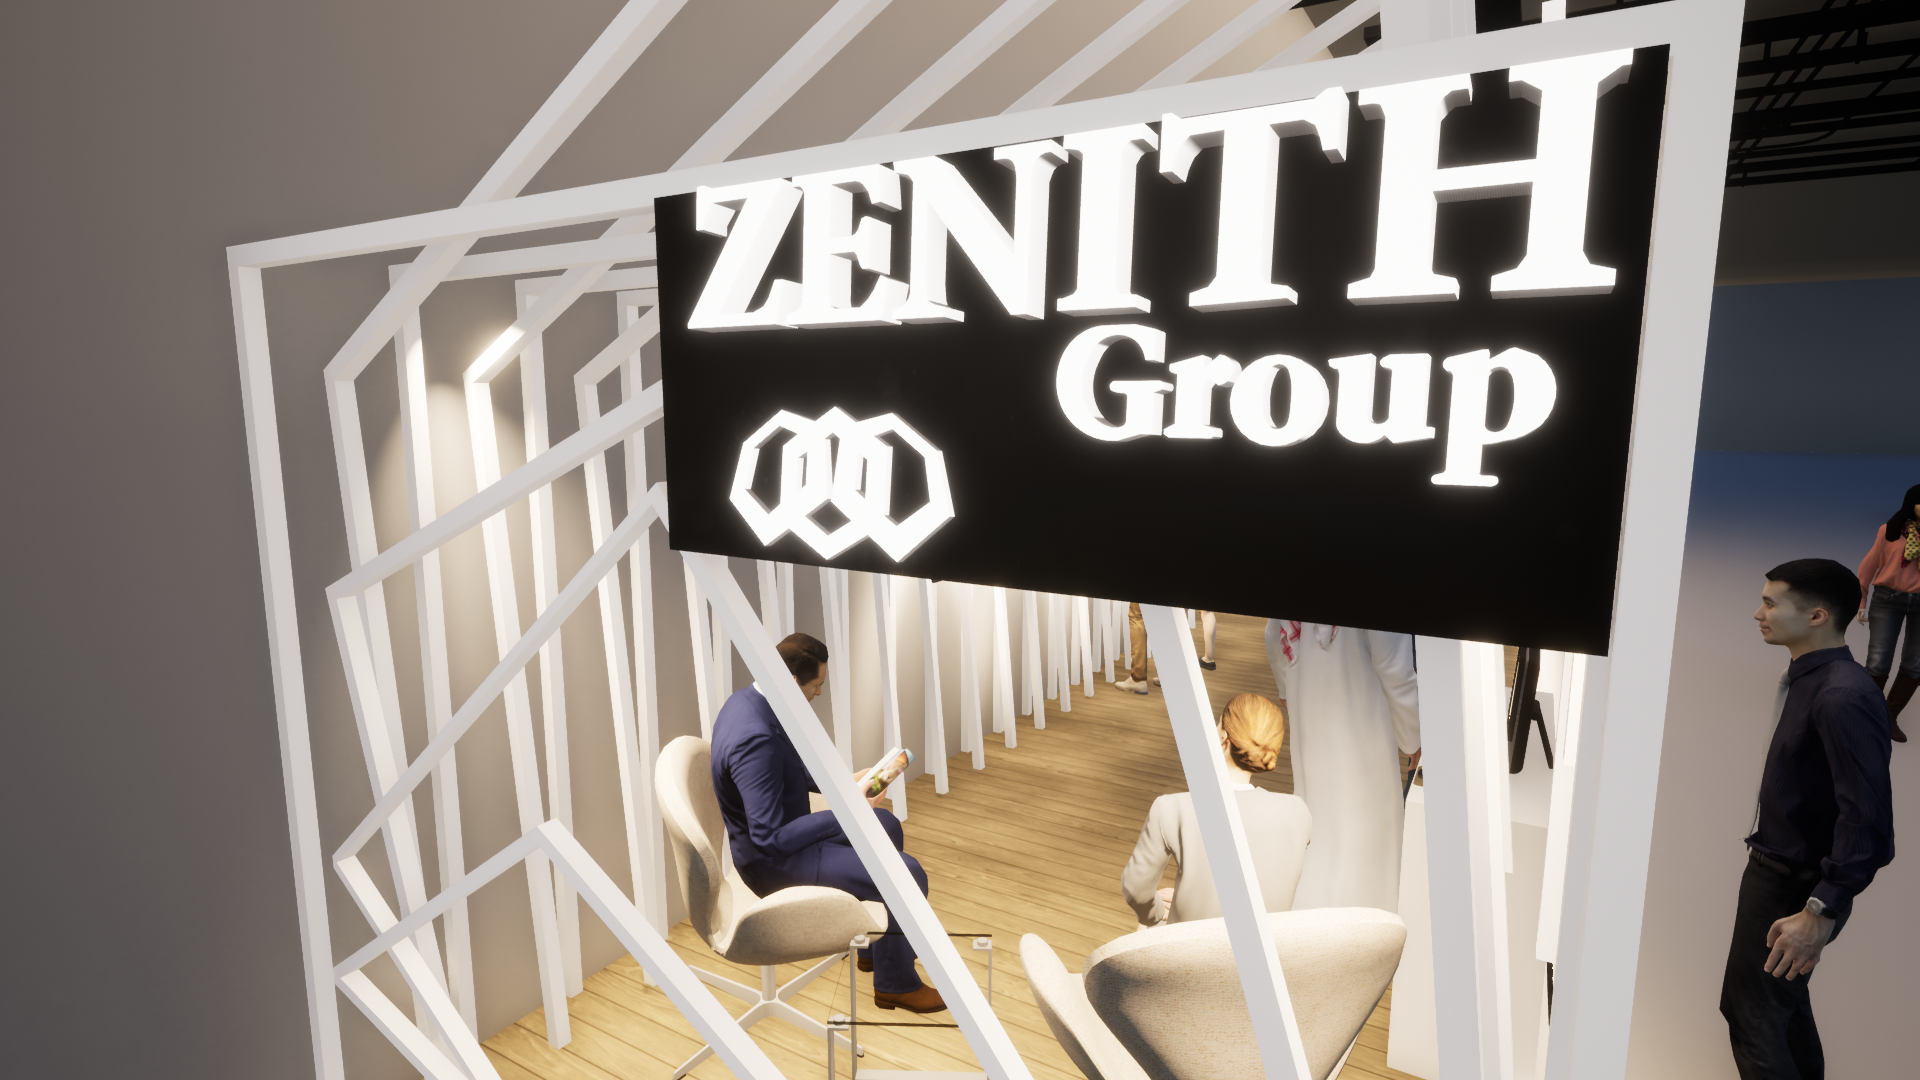 ZENITH Group Stand-Soodeh Abedini-Render (11)